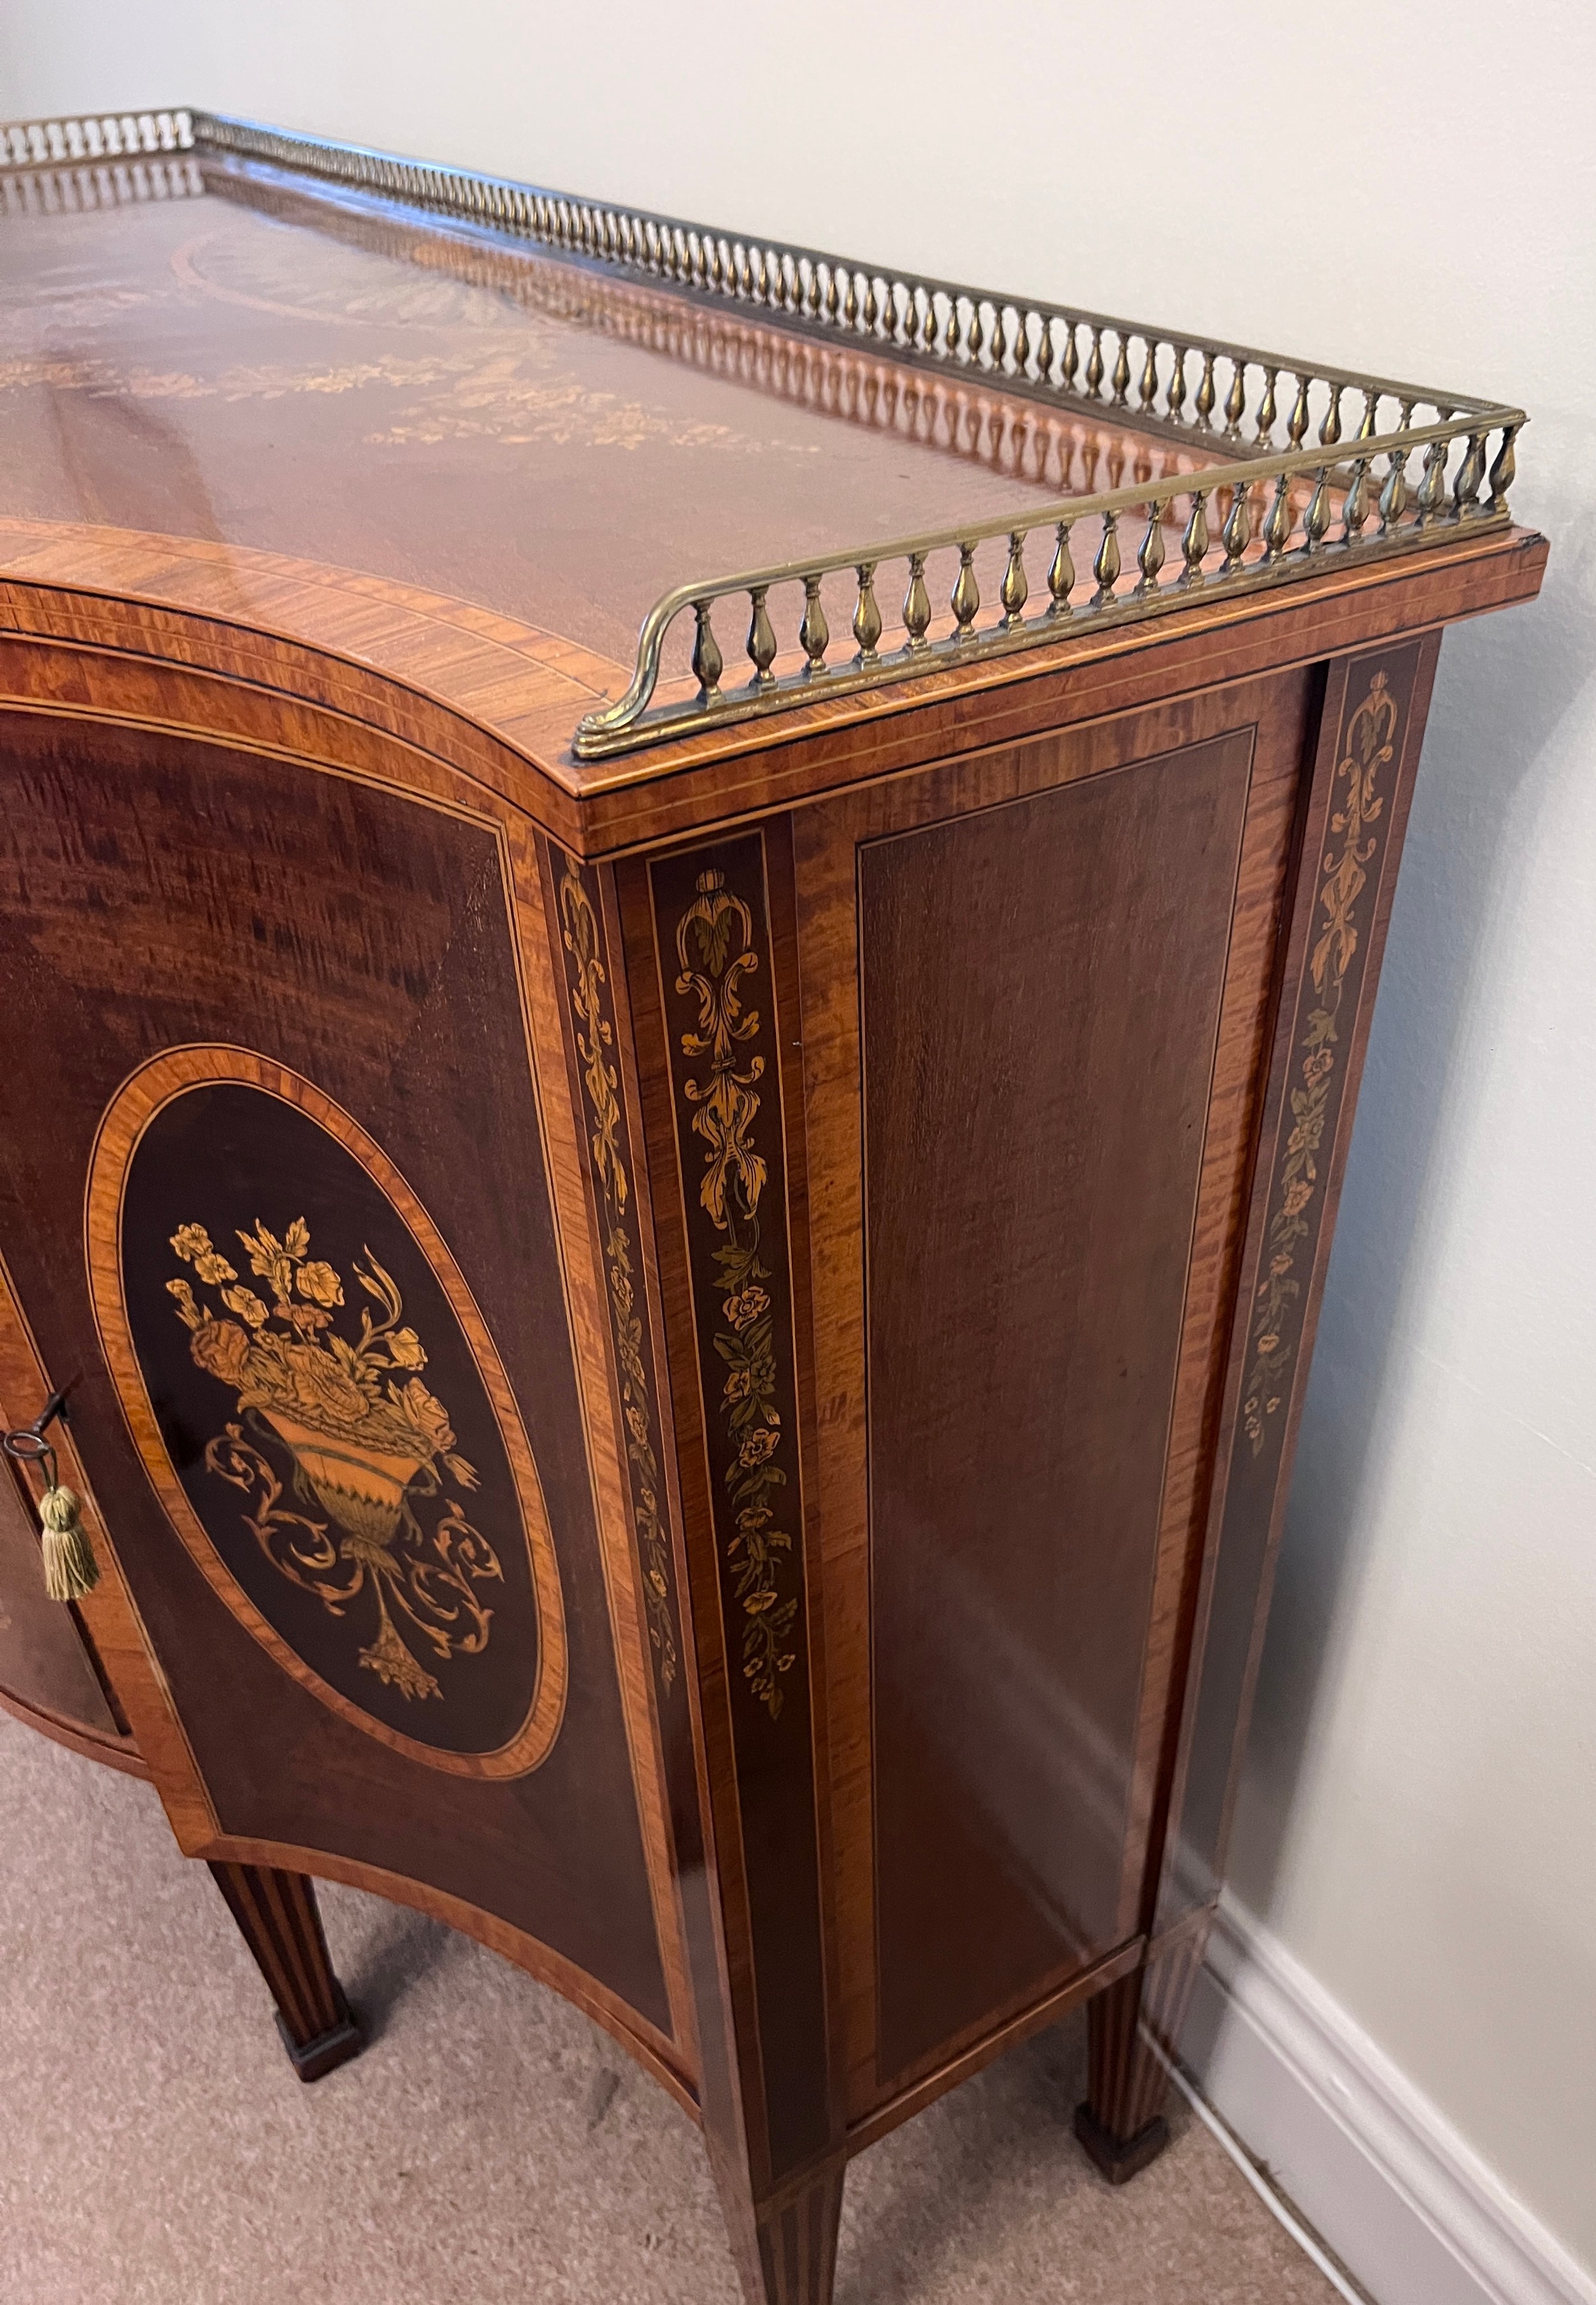 A 19thC continental fine quality breakfront marquetry side cabinet with various woods including - Image 7 of 13